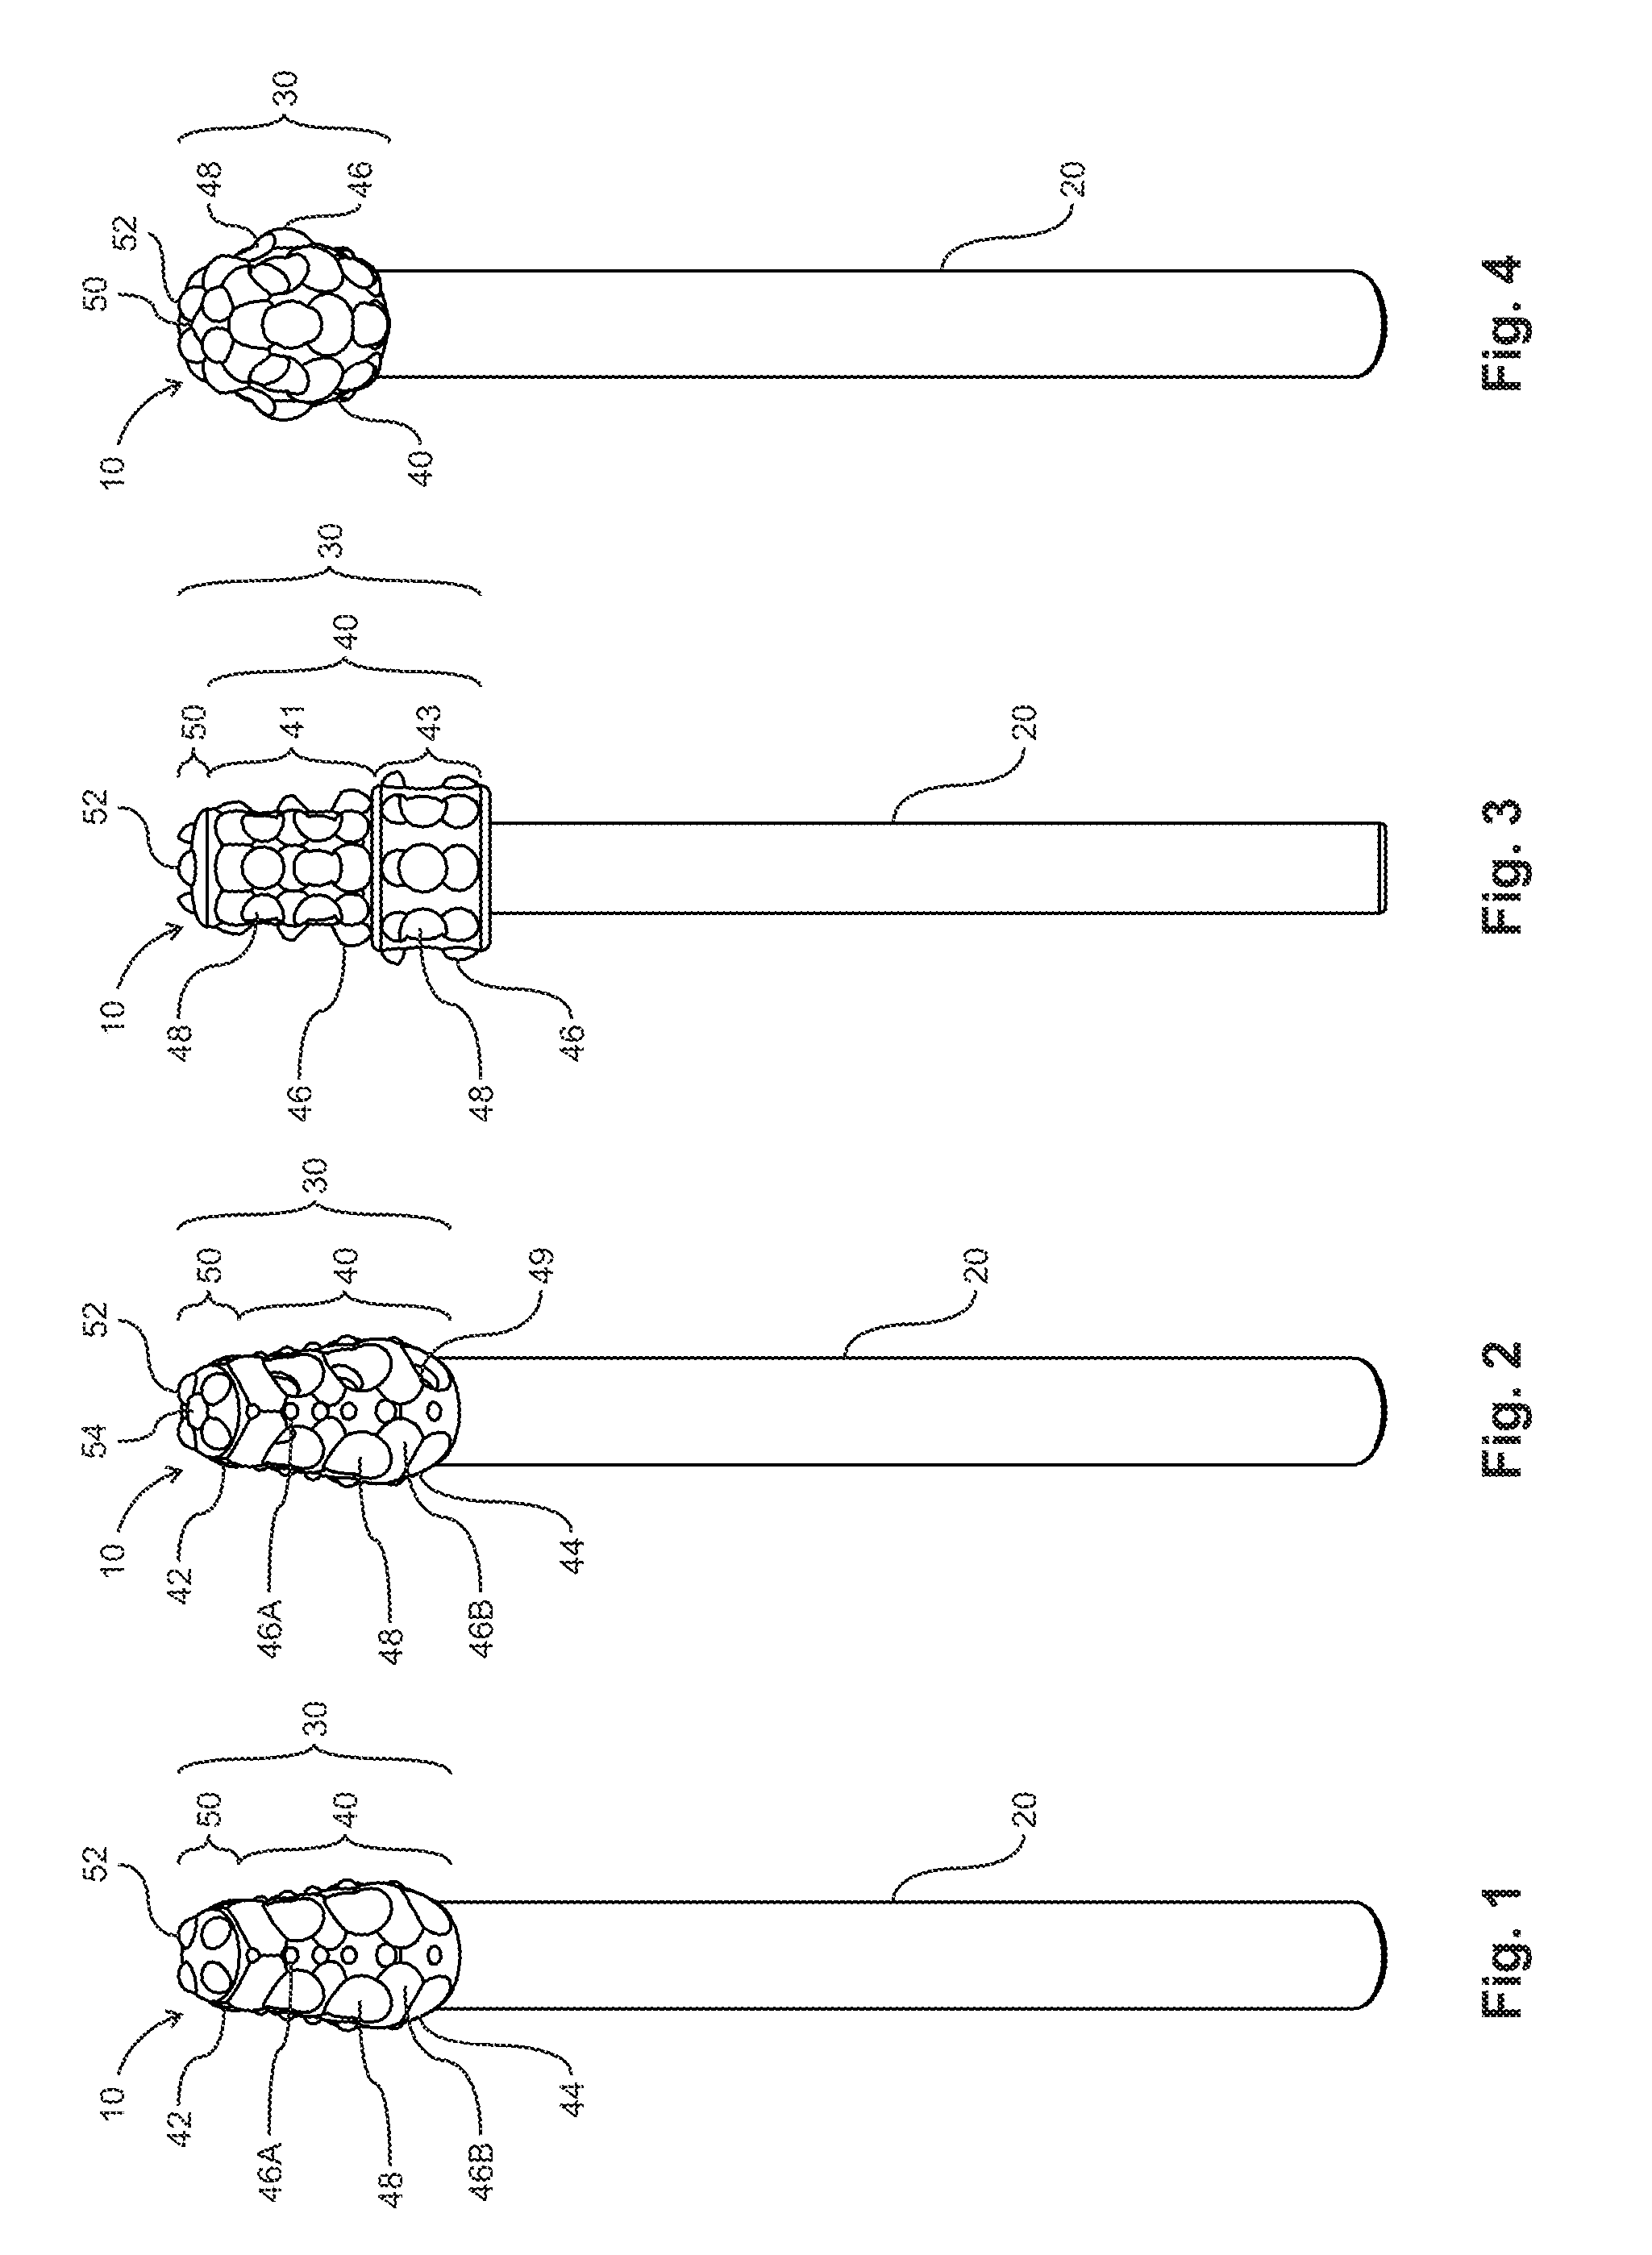 Device and method for removing earwax